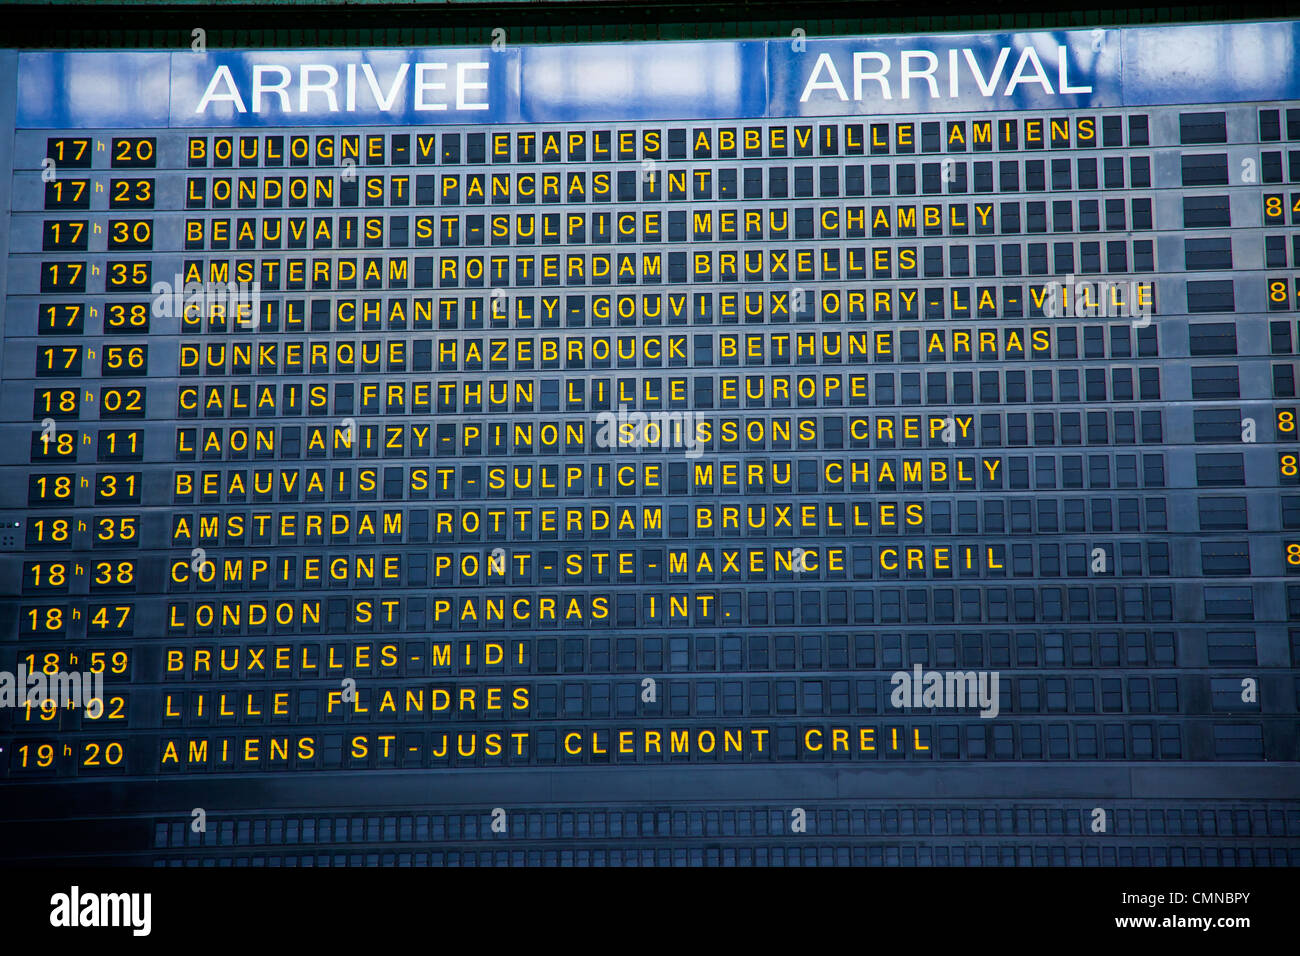 Arrivals board in Gare du Nord in Paris France Stock Photo